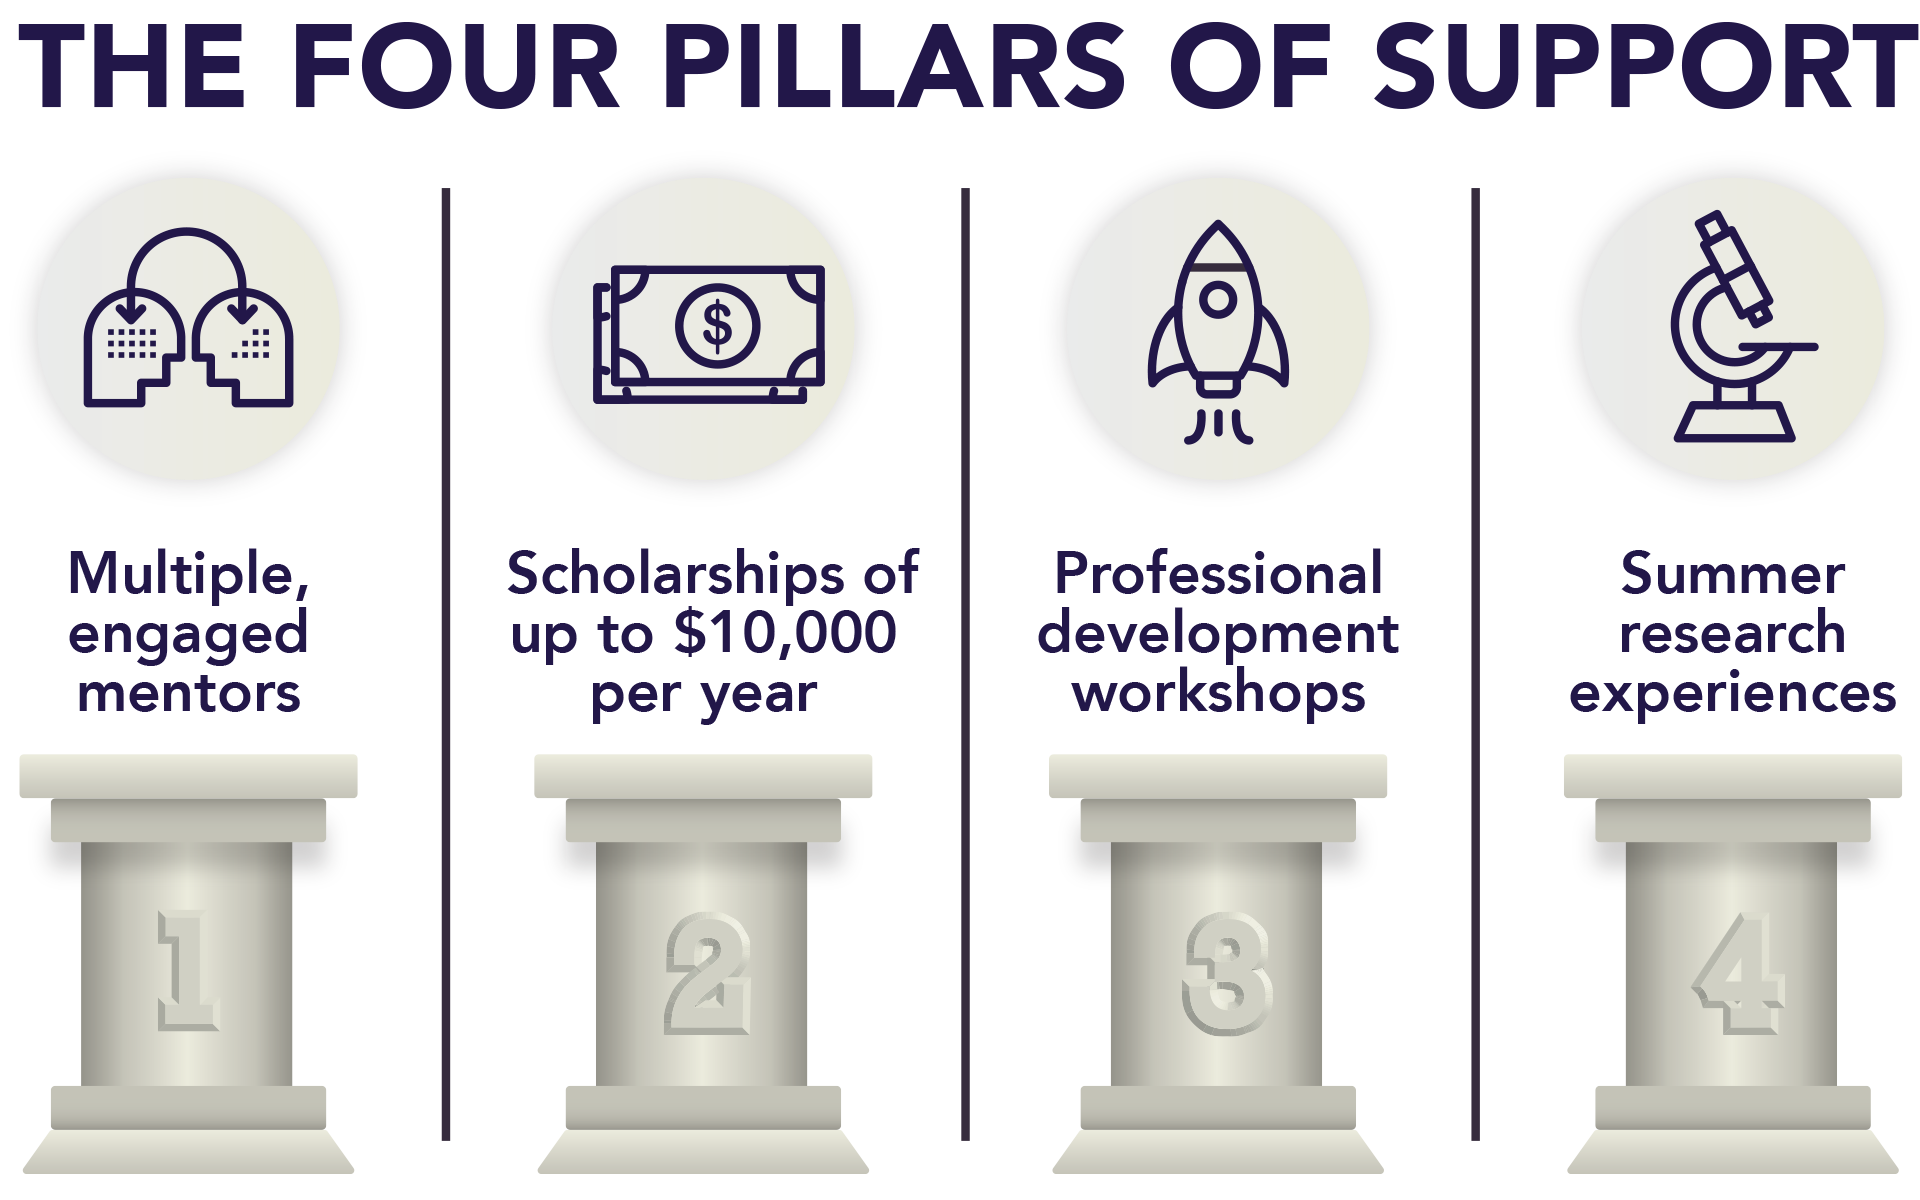 Pillar One: Multiple engaged mentors. Pillar Two: Scholarships of up to $10,000 per year. Pillar Three: Professional development workshops. Pillar Four: Summer research experience.